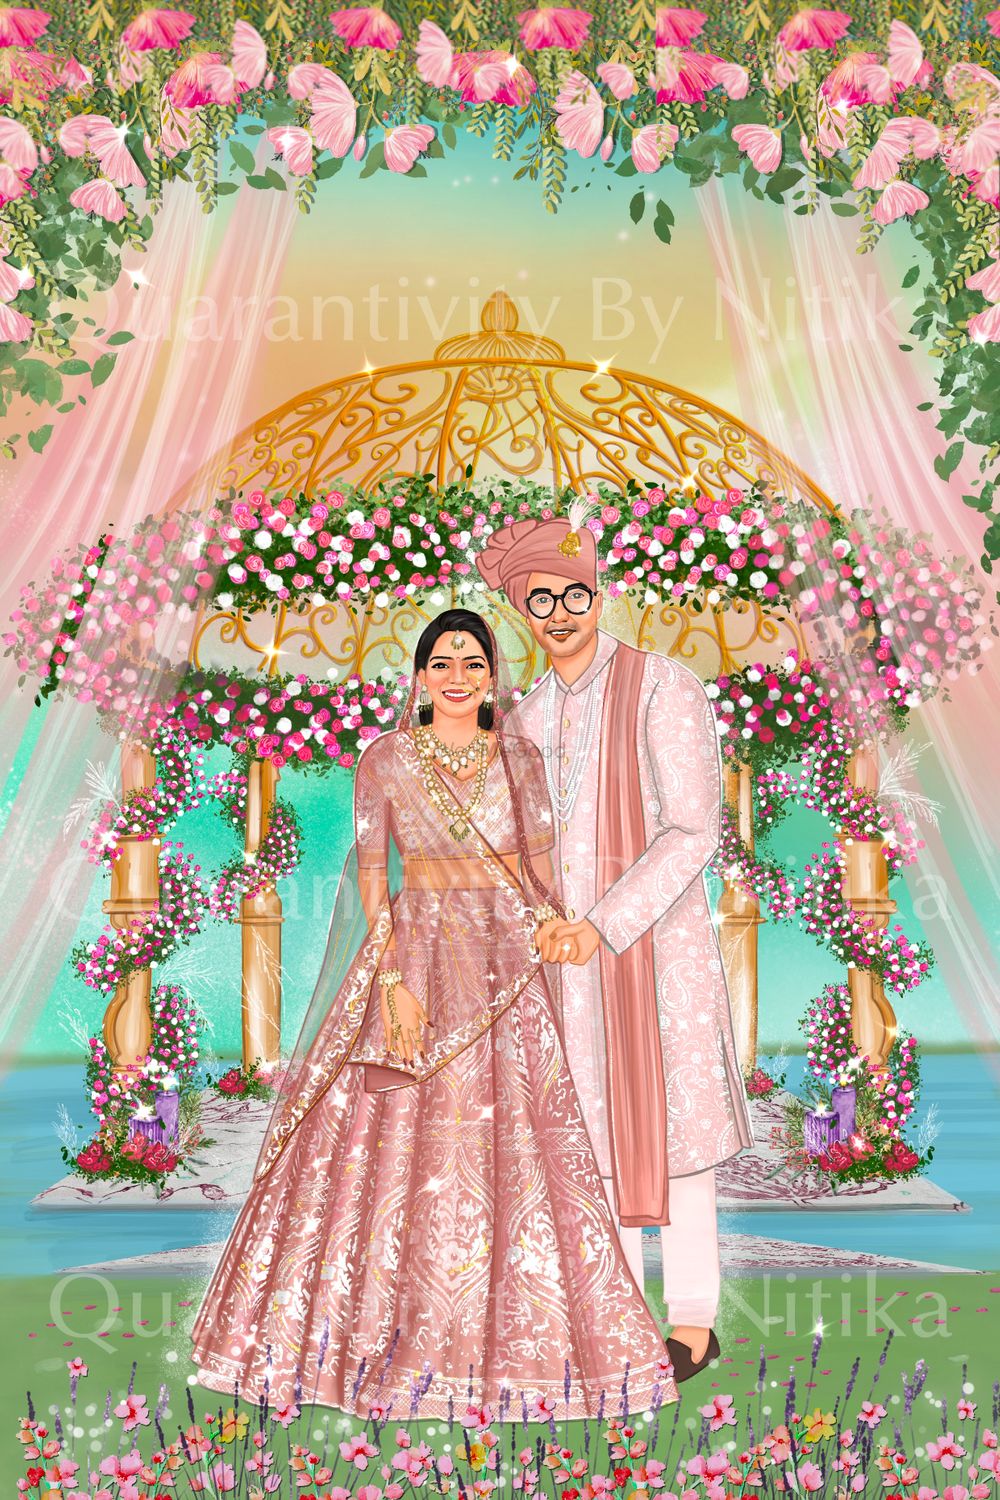 Photo From Caricature Wedding Invite - Central India - By Quarantivity By Nitika